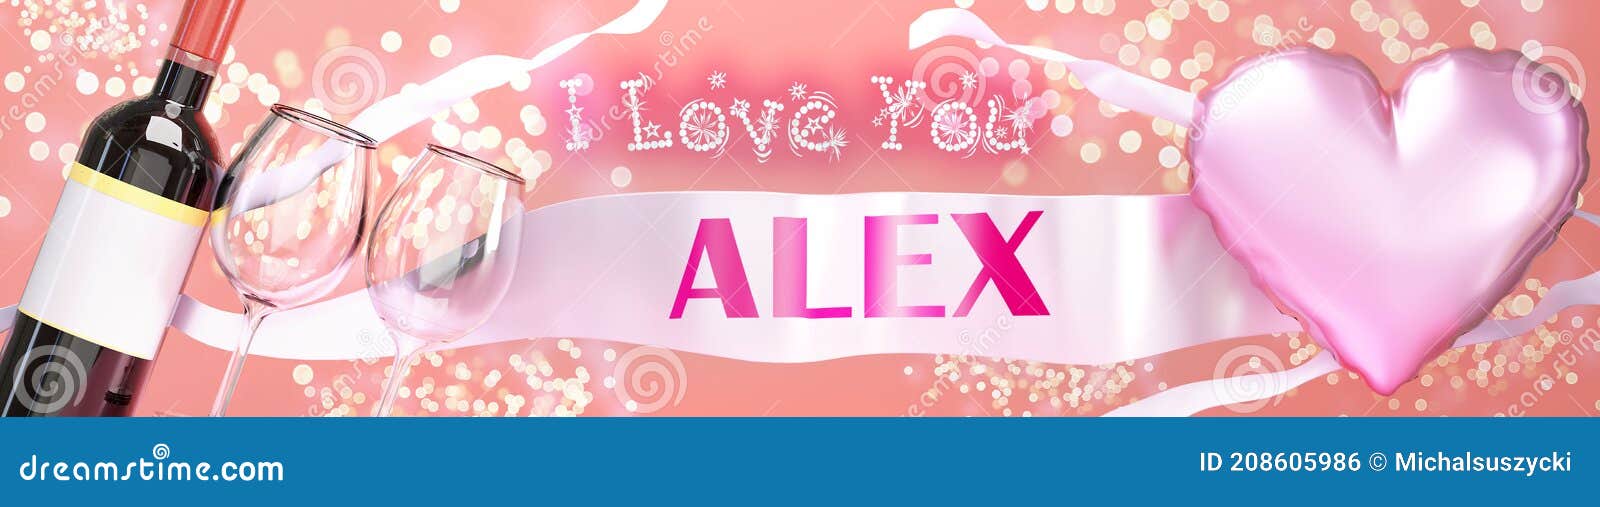 i love you alex - wedding  valentine's or just to say i love you celebration card